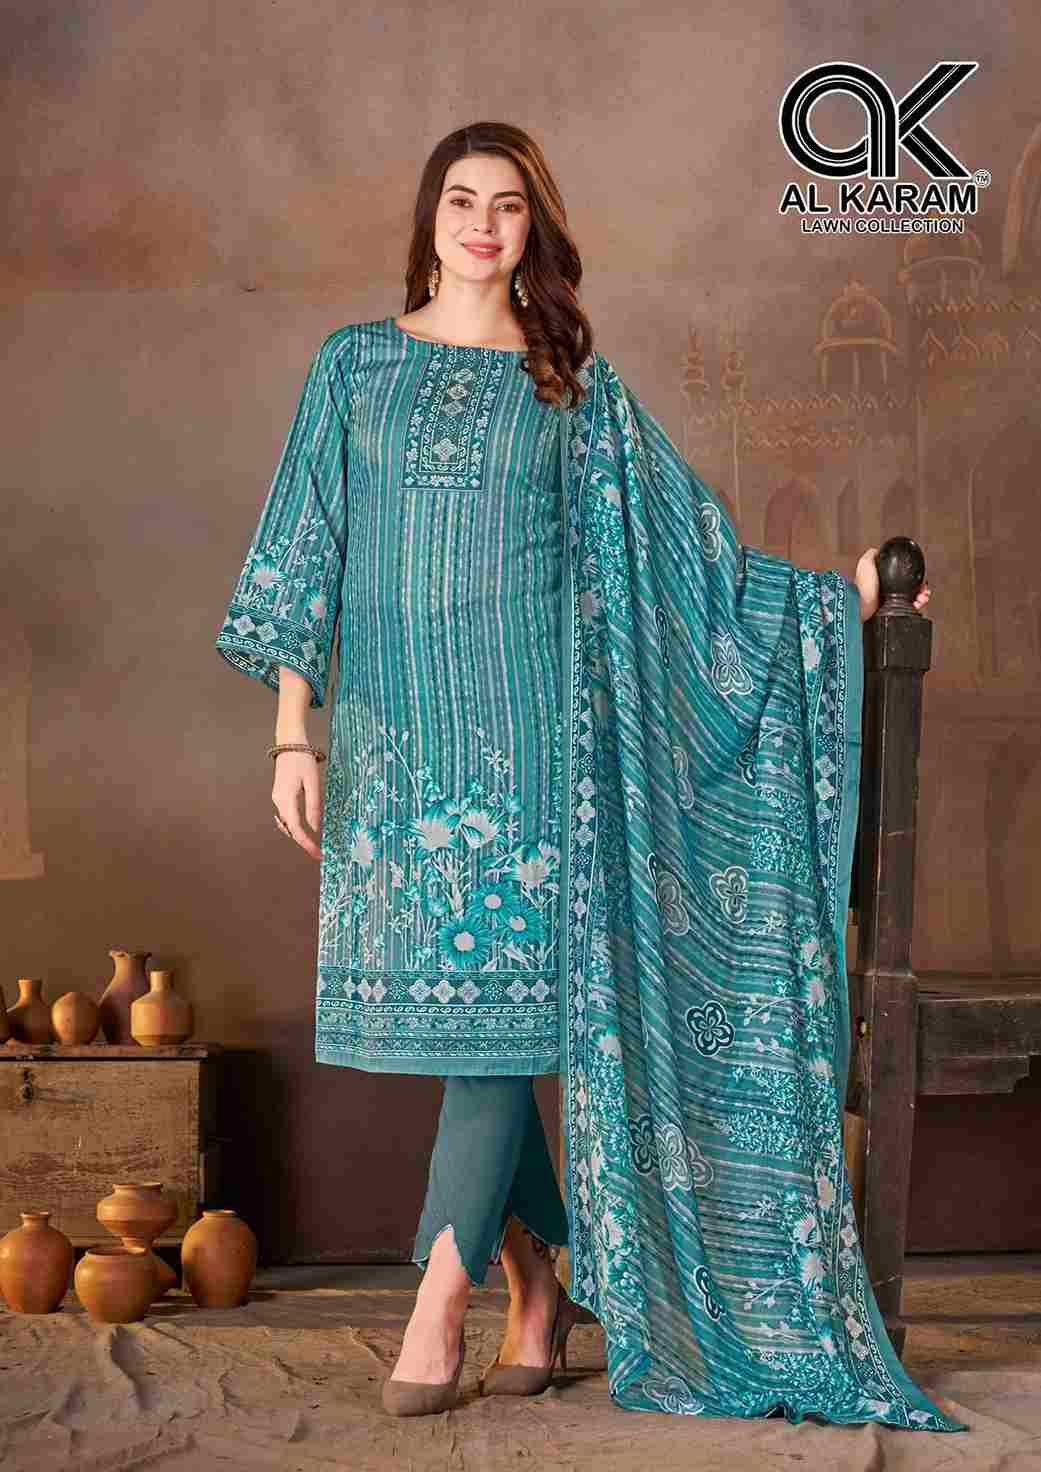 Mahe Ruh By Al Karam Lawn Collection 1001 To 1008 Series Beautiful Festive Suits Stylish Fancy Colorful Casual Wear & Ethnic Wear Pure Cotton Print Dresses At Wholesale Price